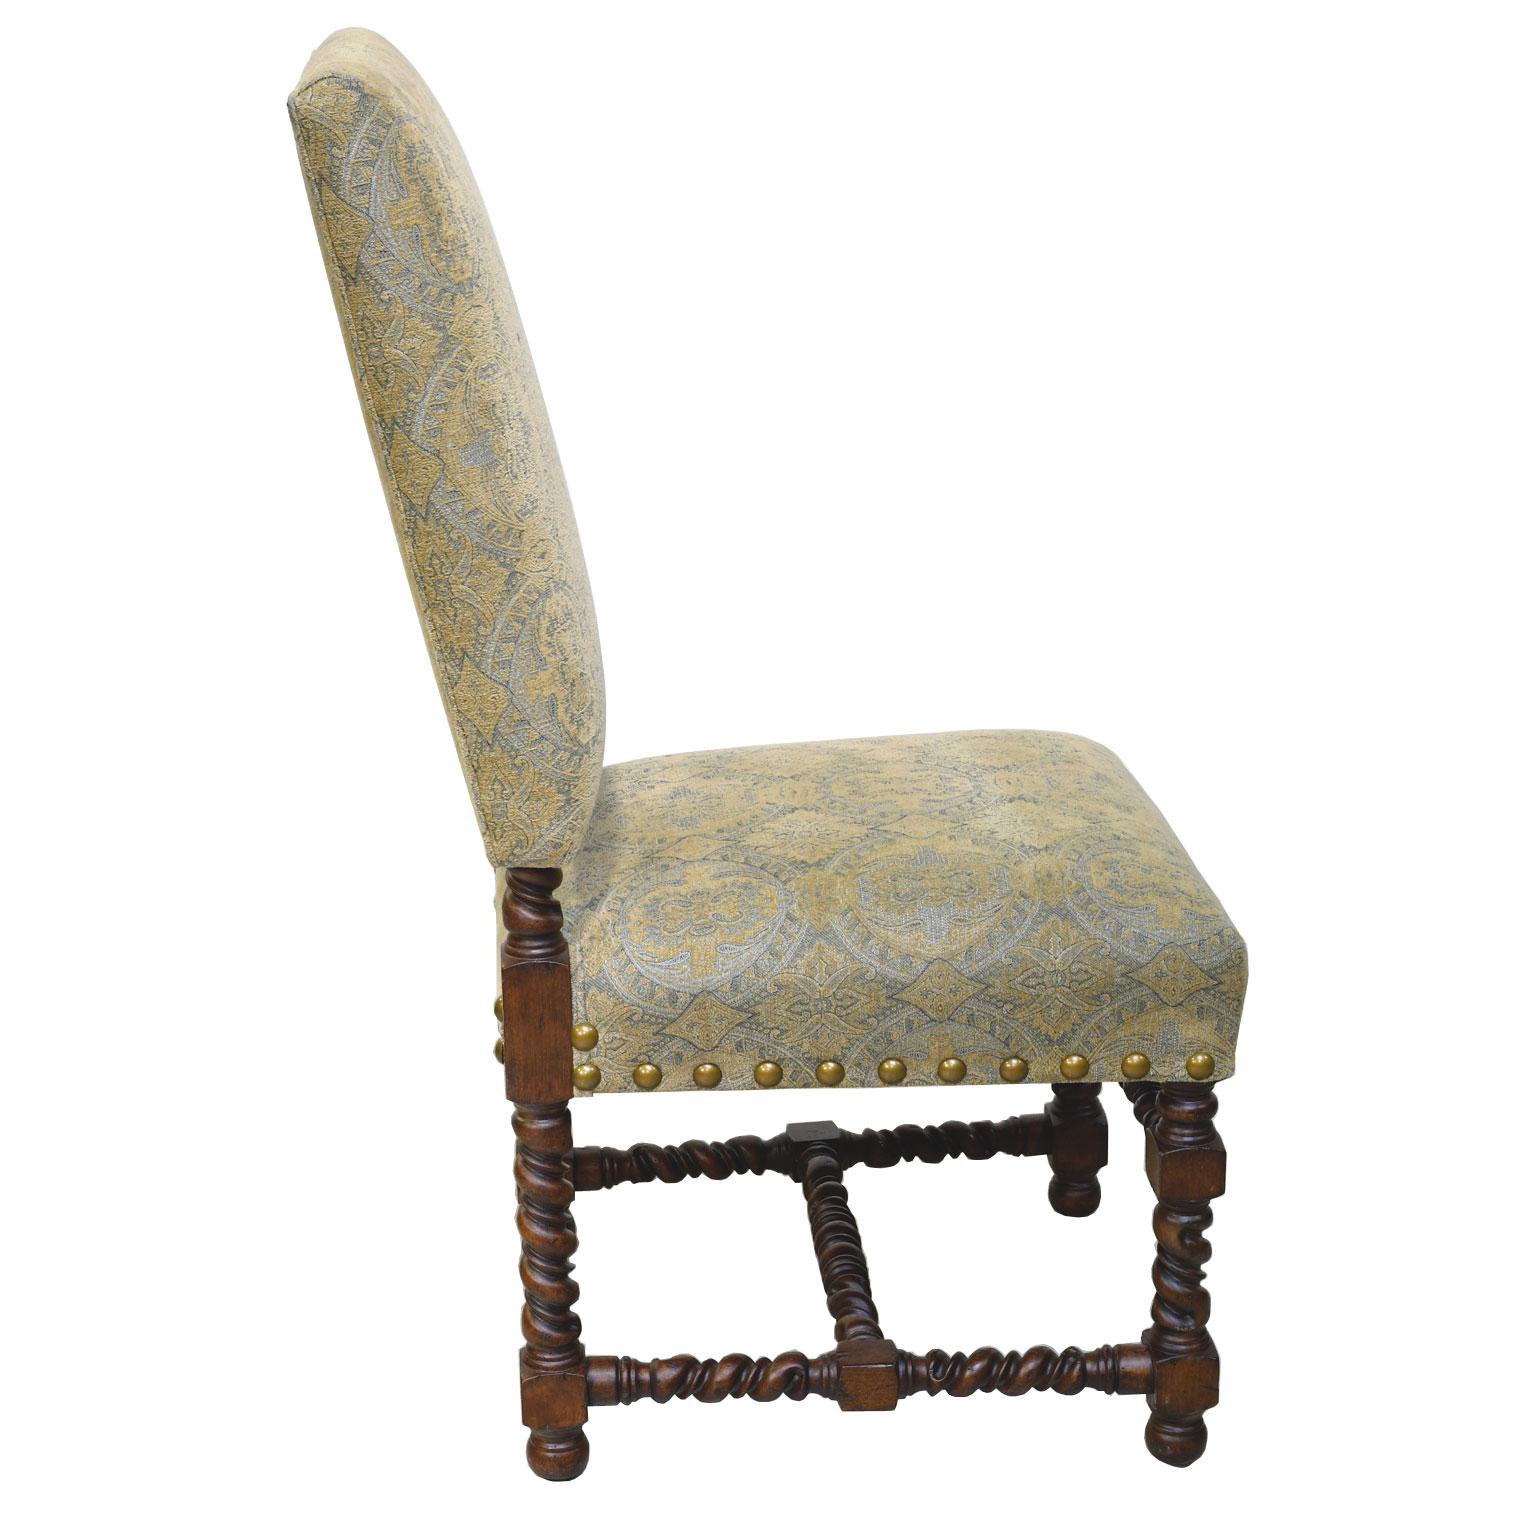 Contemporary Set of Ten Upholstered Tudor-Style Dining Chairs with Turned Legs & Stretcher